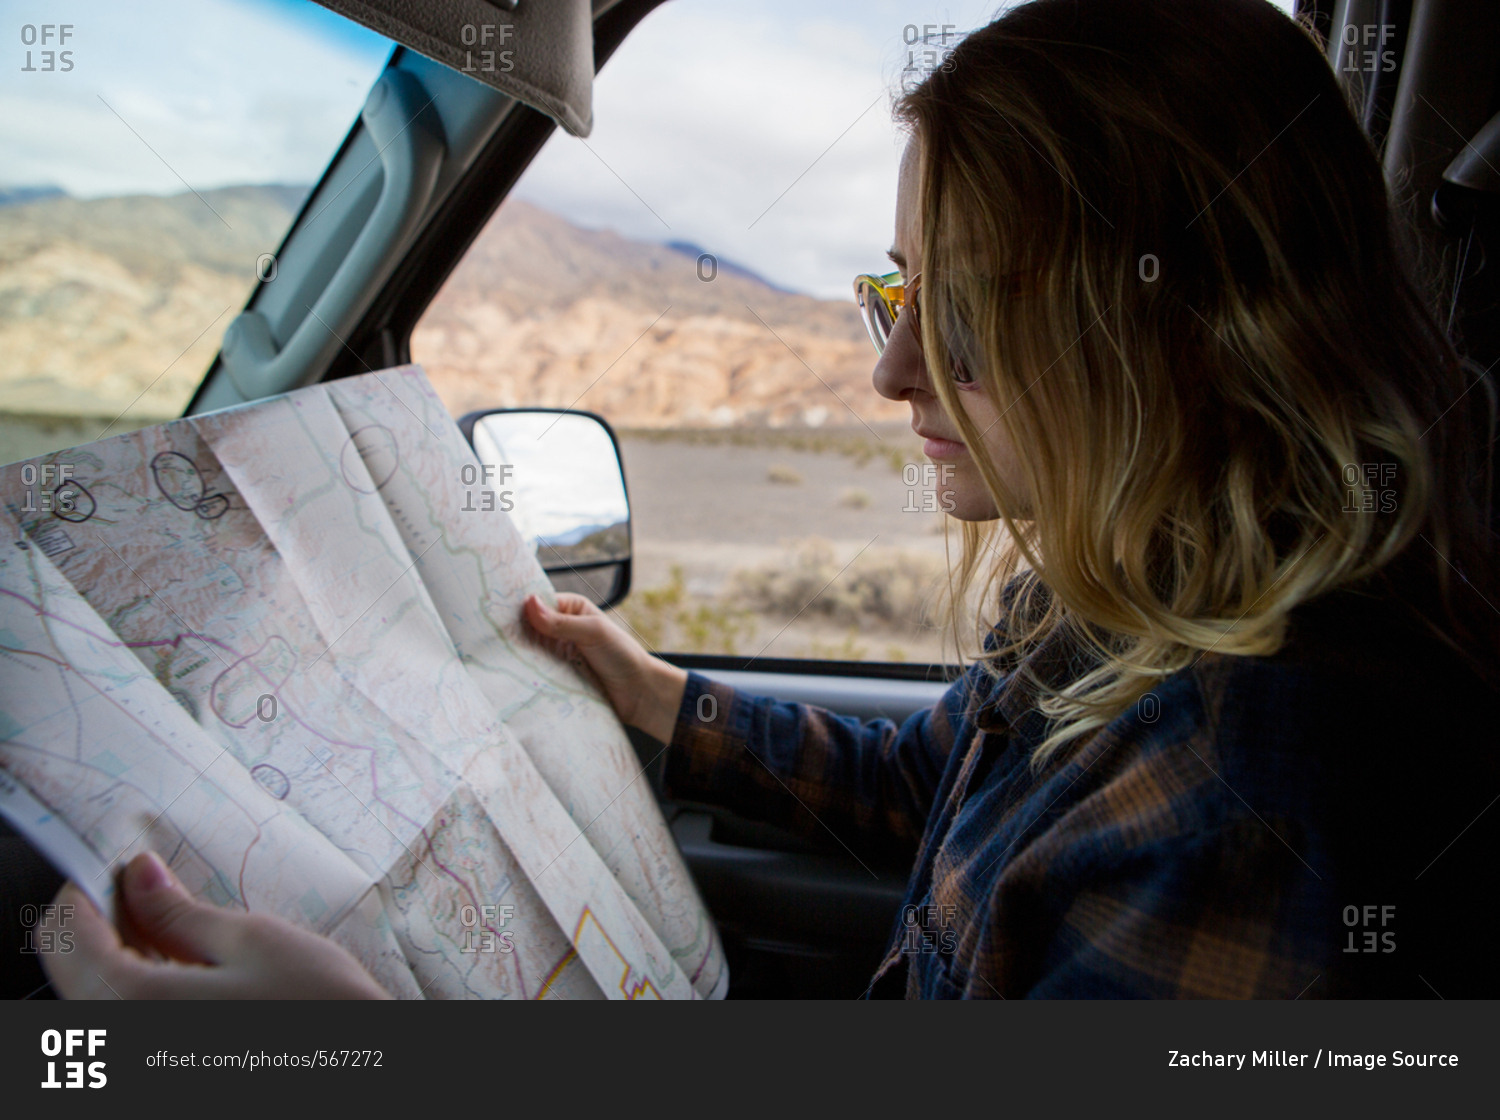 Woman reading map in car, Death Valley National Park, California, US